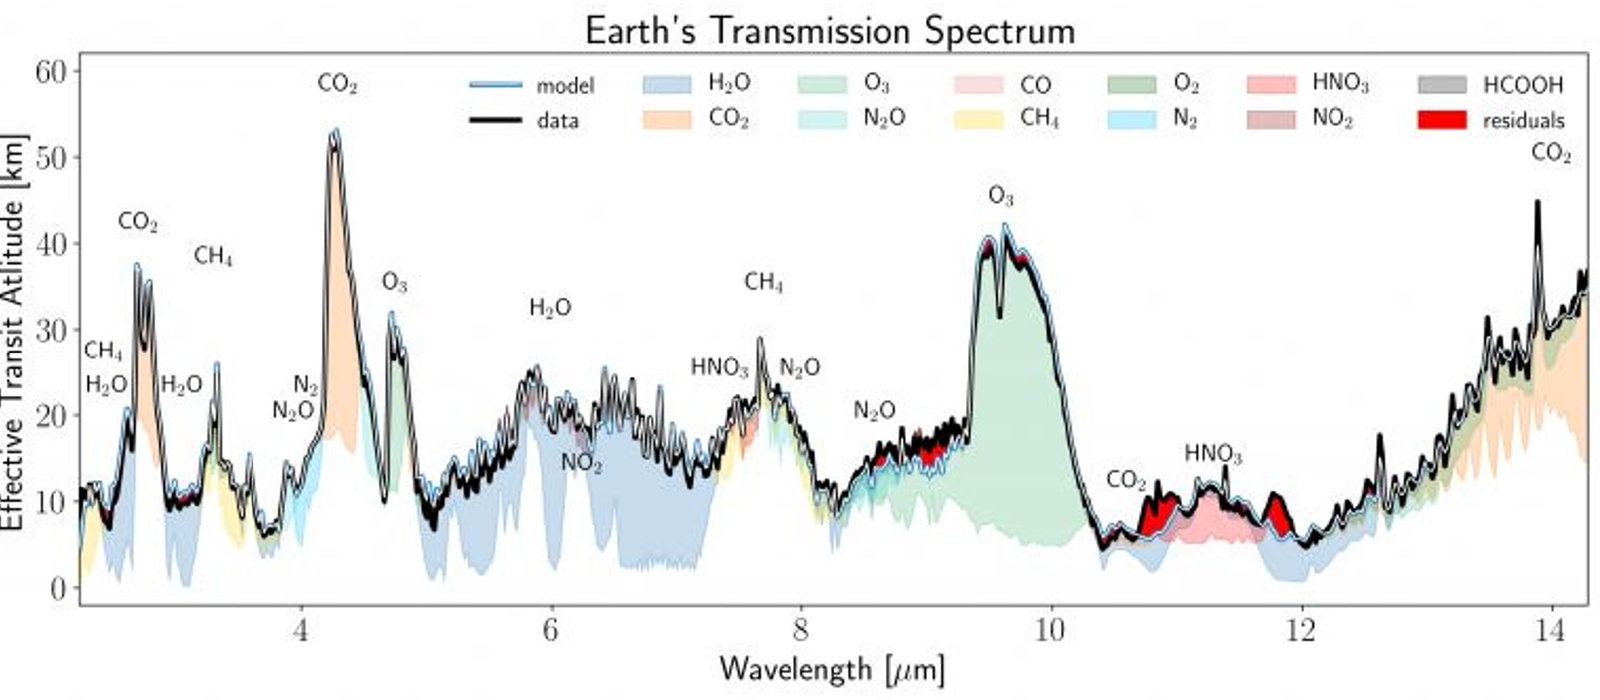 A graph showing the spectrum of Earth's atmosphere